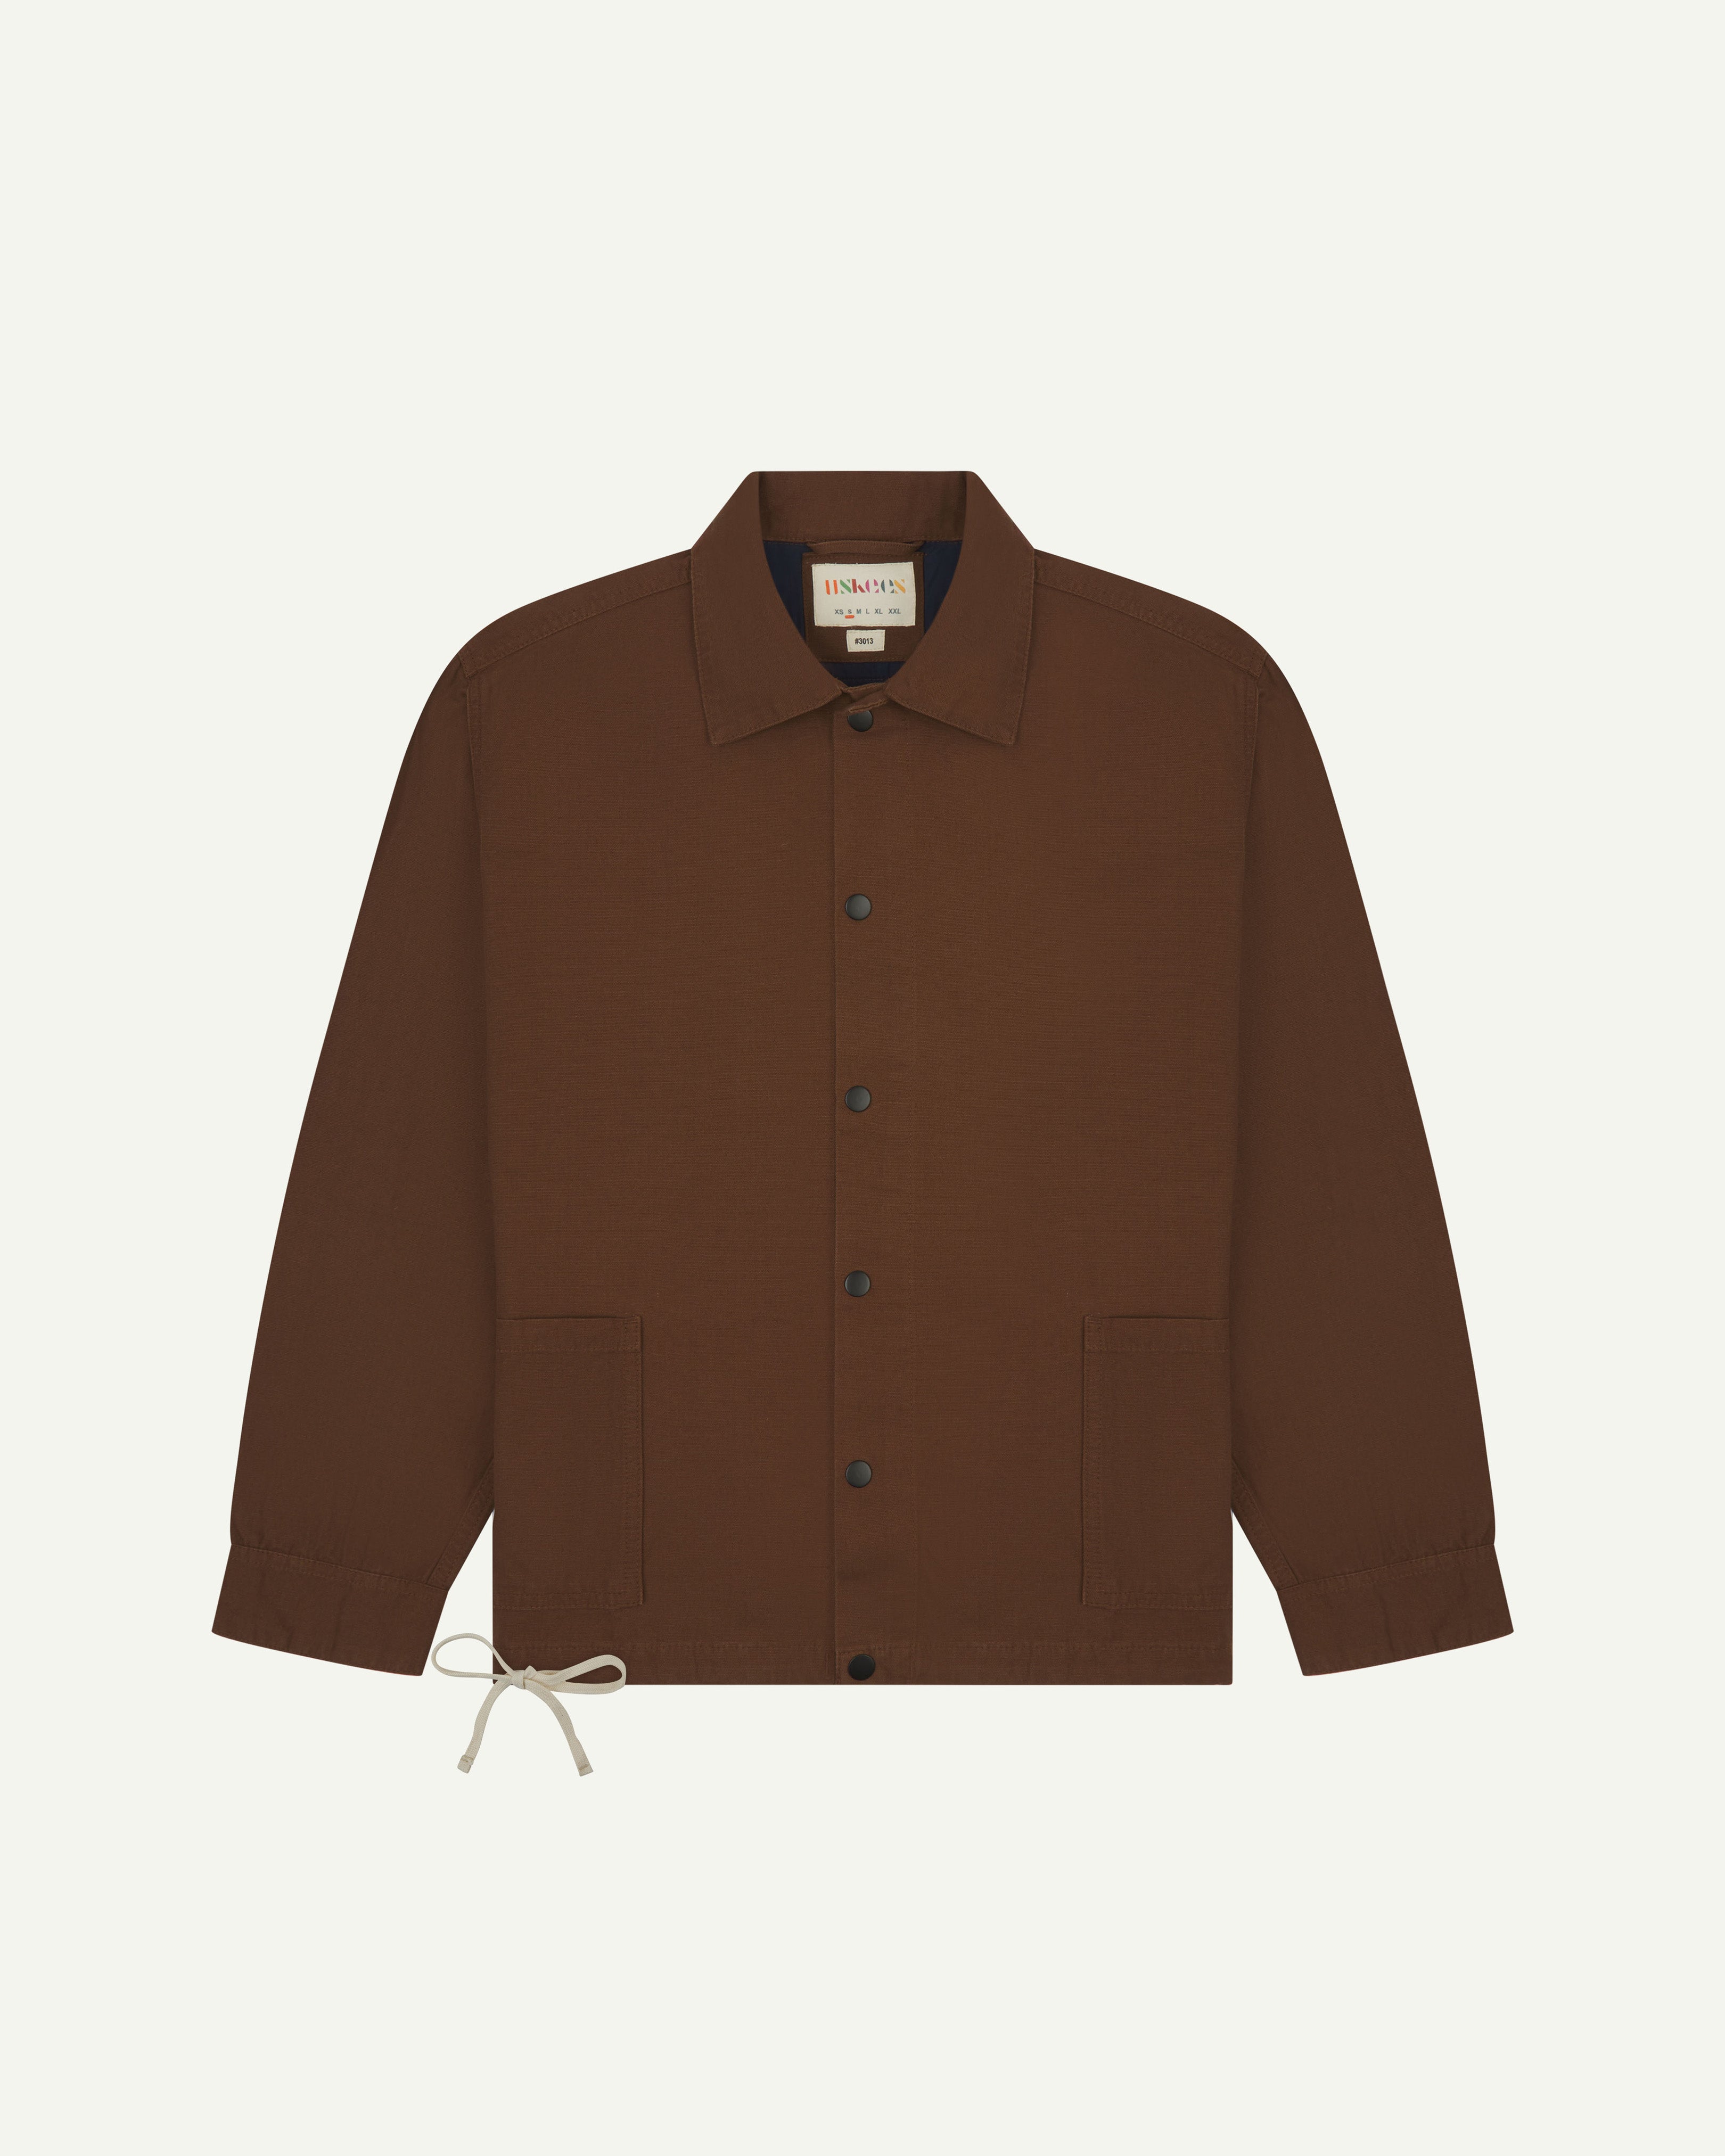 Front flat view of Uskees chocolate-brown organic cotton coach jacket with 2 patch pockets.